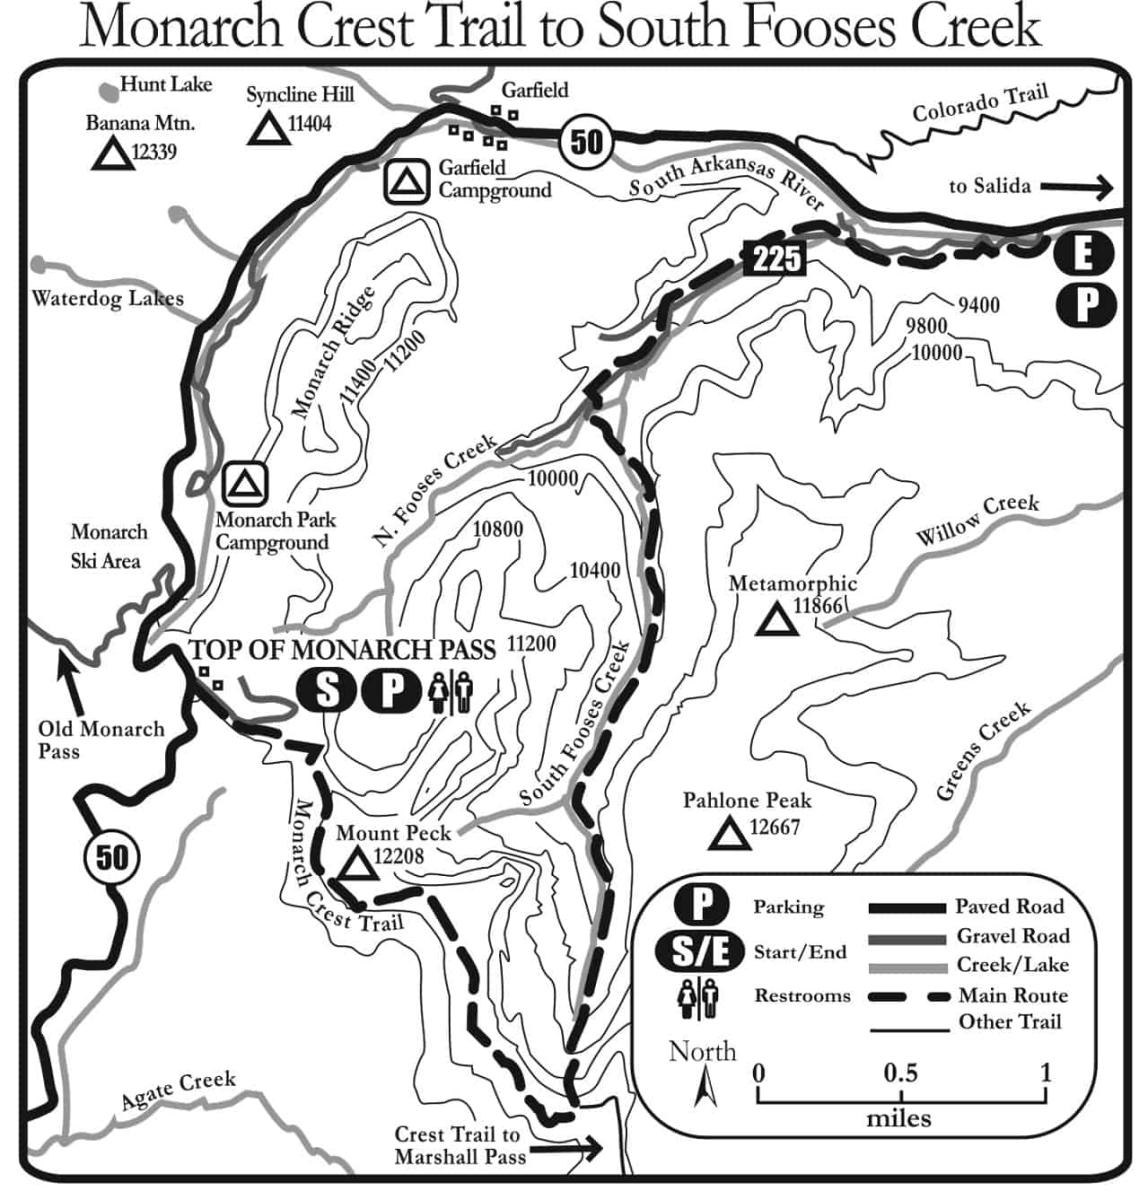 Monarch Crest Trail to South Fooses Creek map